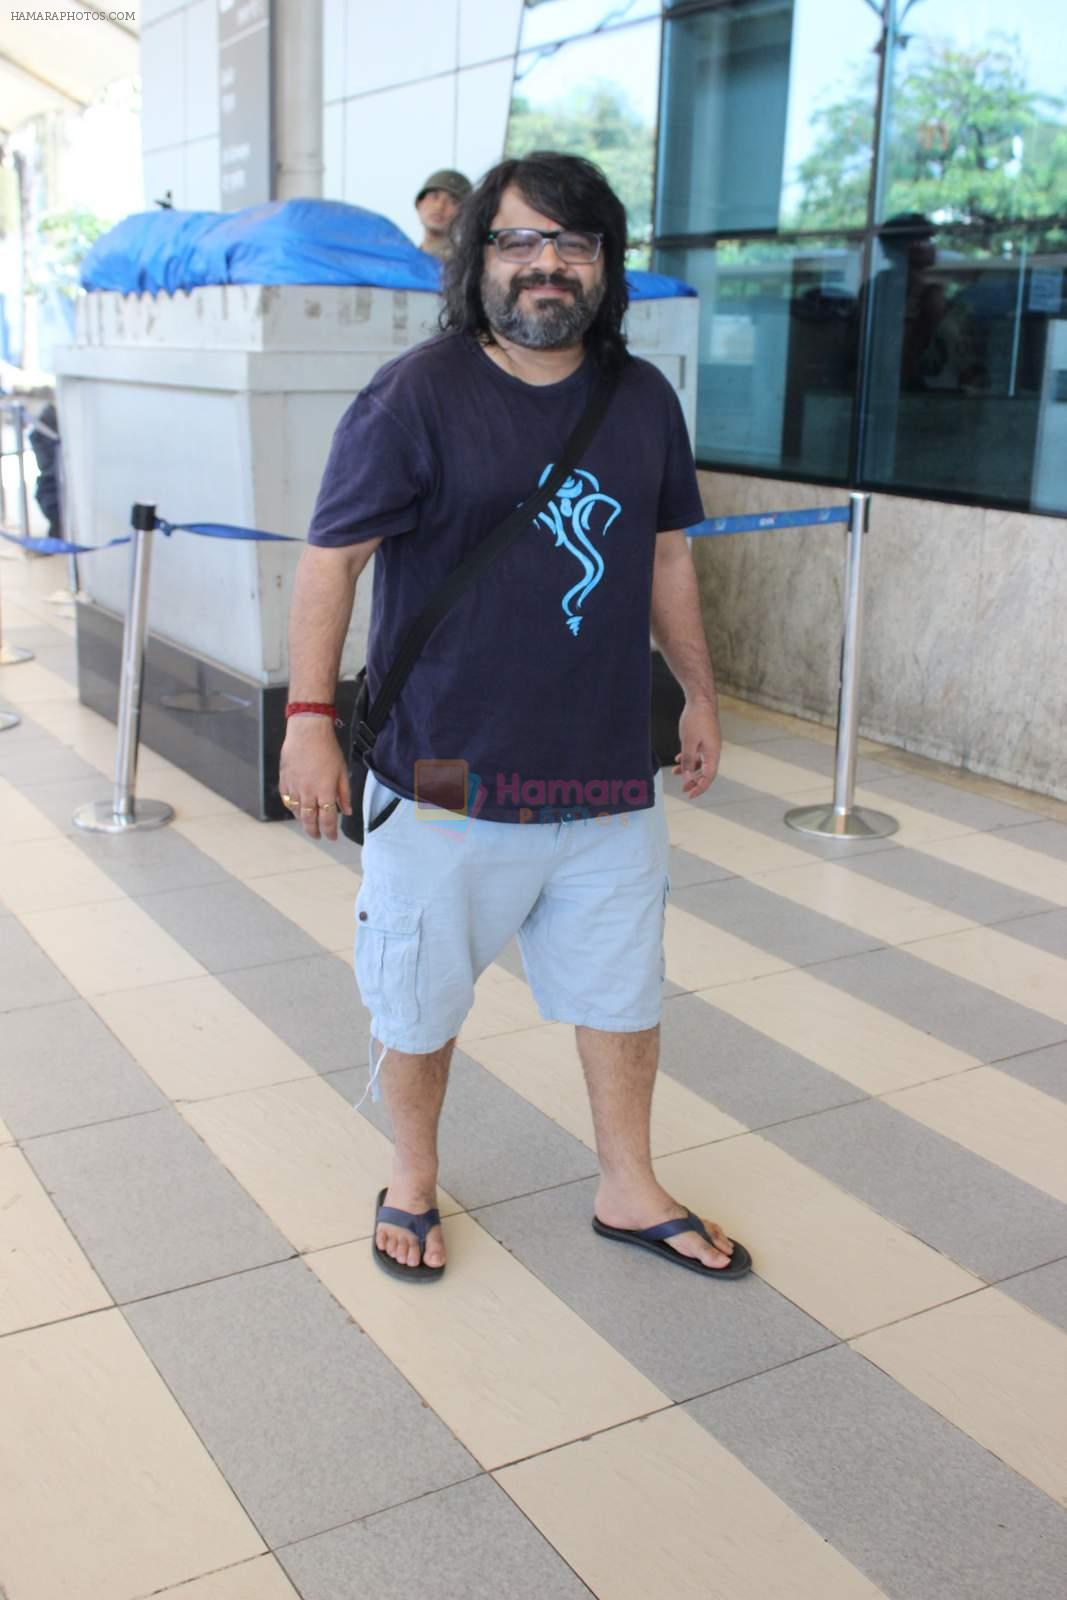 Pritam Chakraborty snapped at airport on 12th Dec 2015